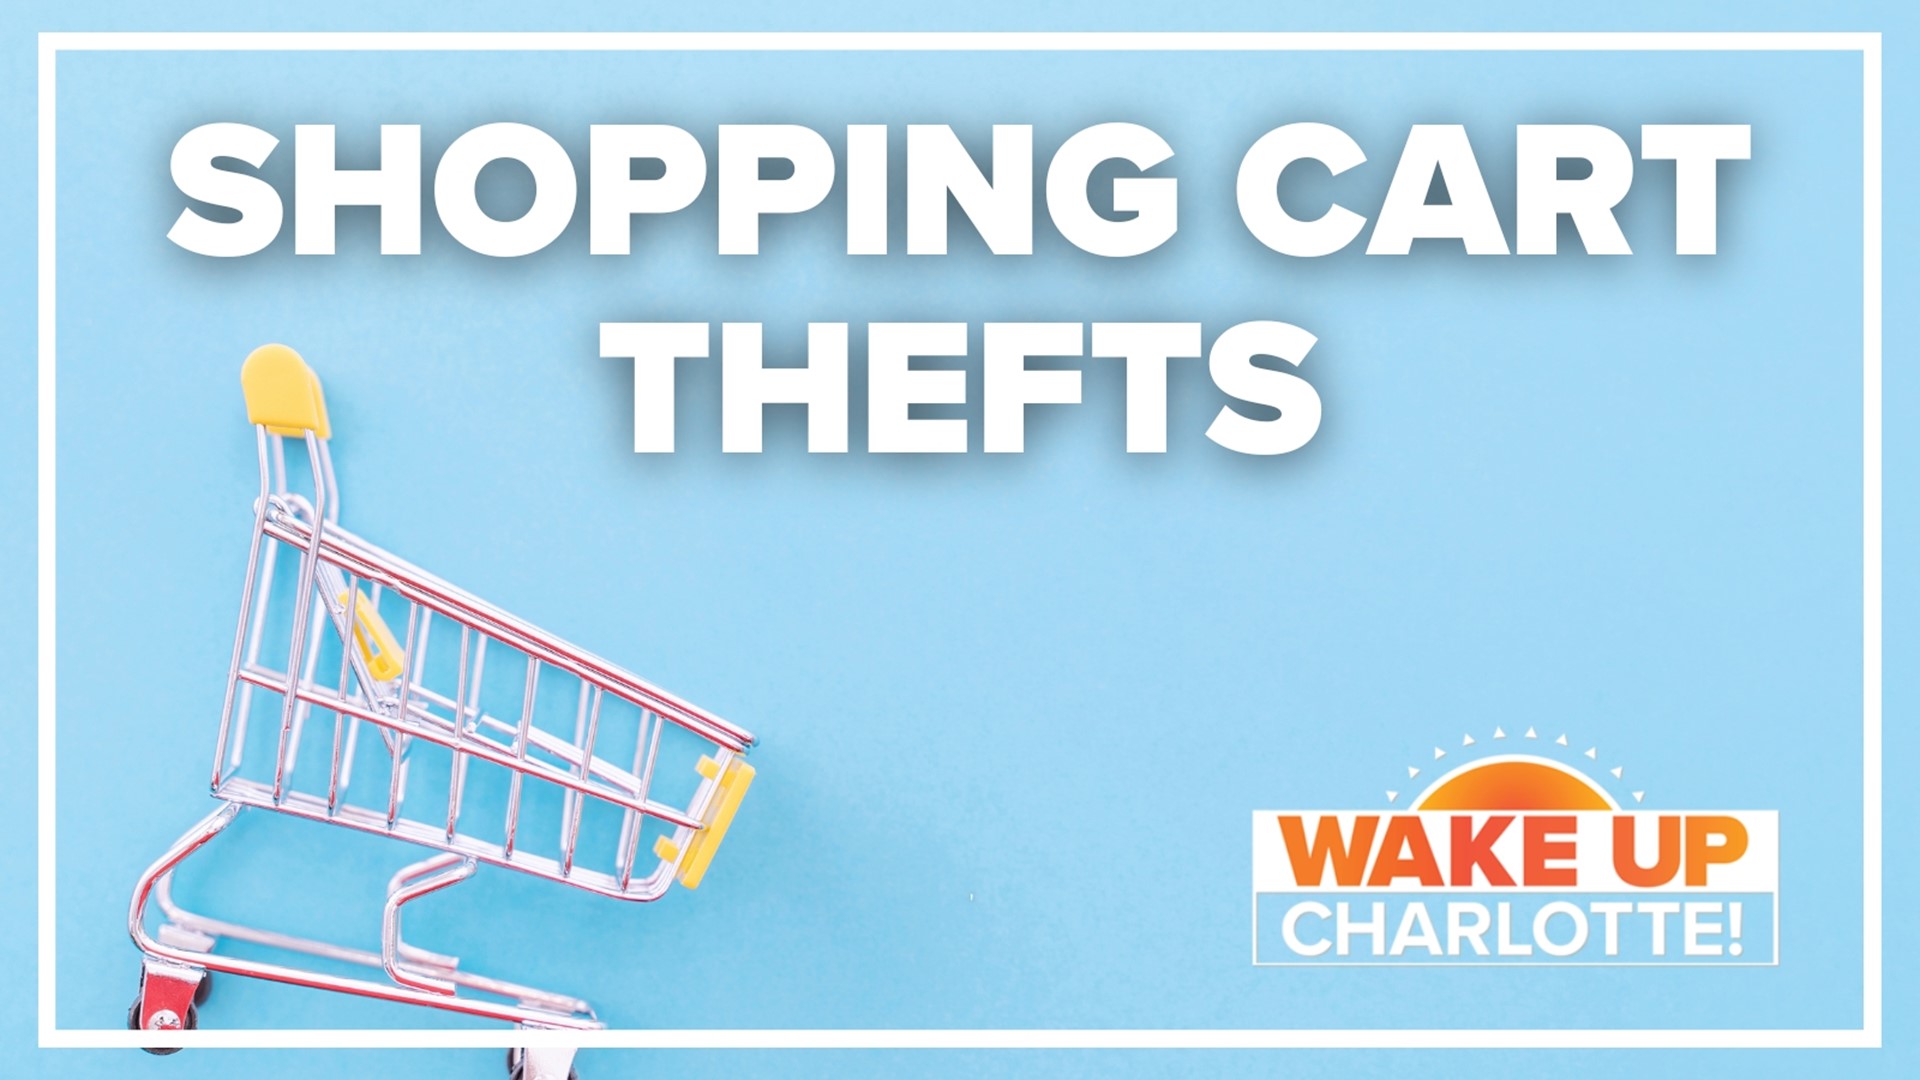 Shopping cart theft is on the rise, but multiple organizations are working to help.